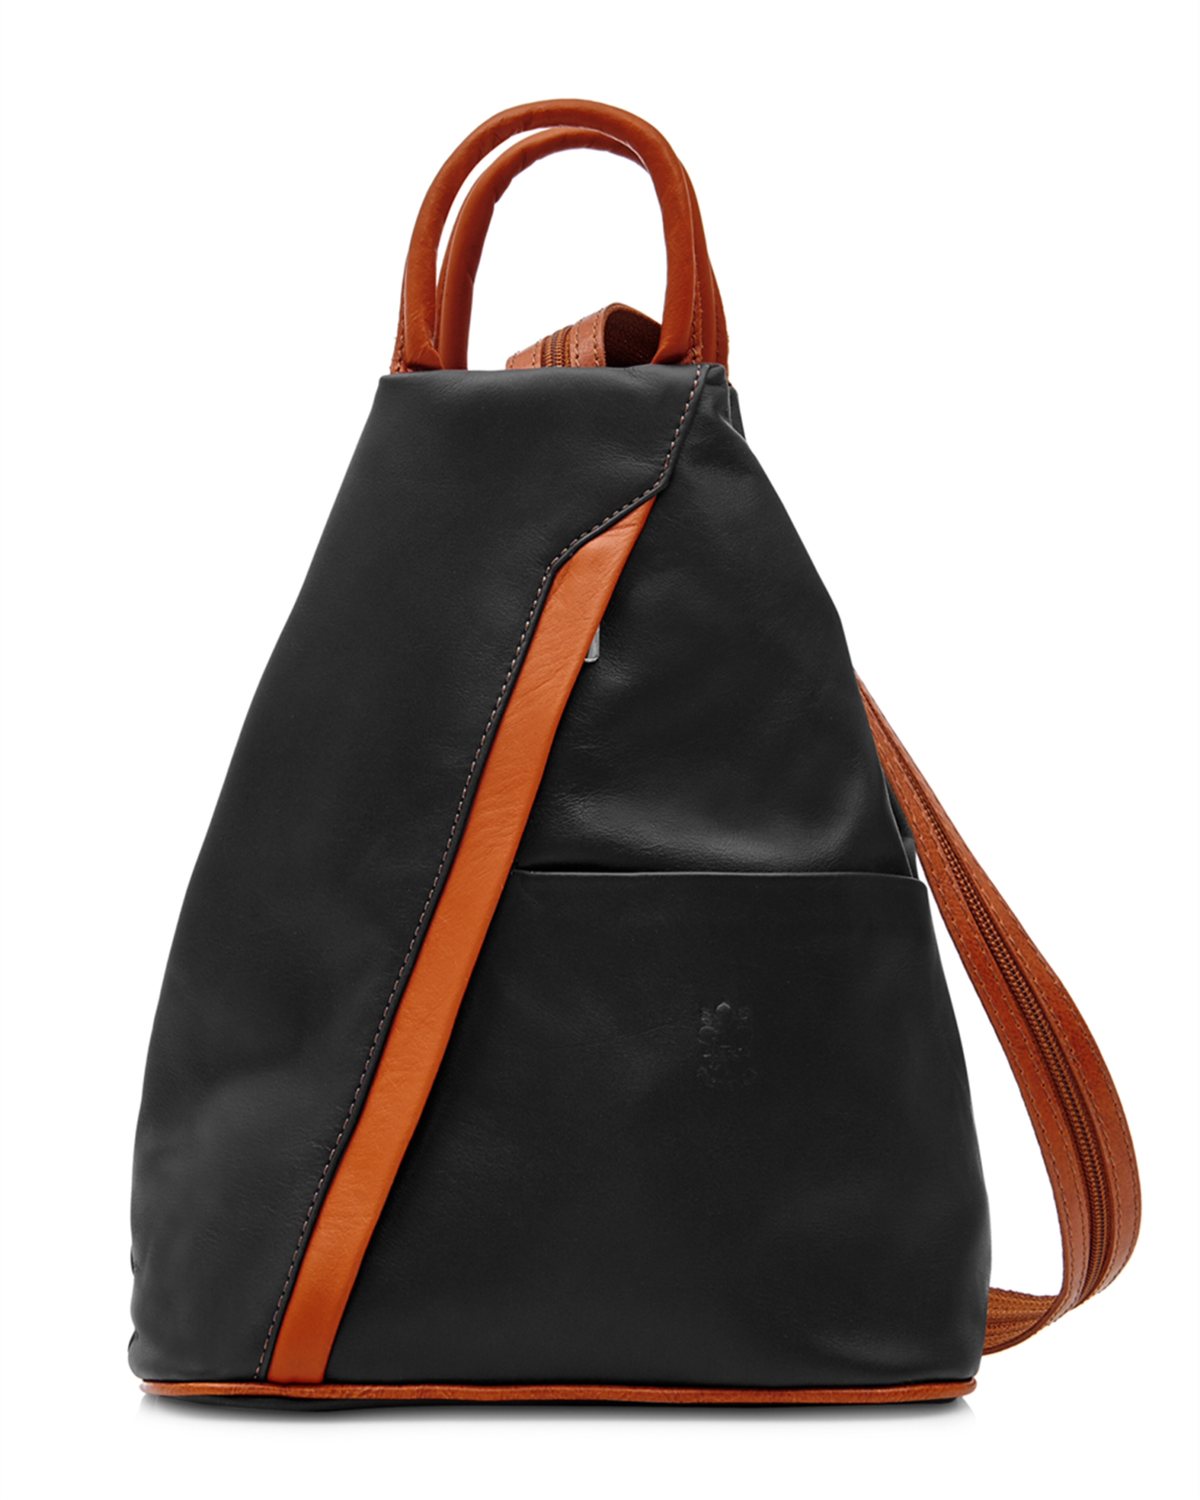 Black Body With Tan Trim Soft Leather Backpack